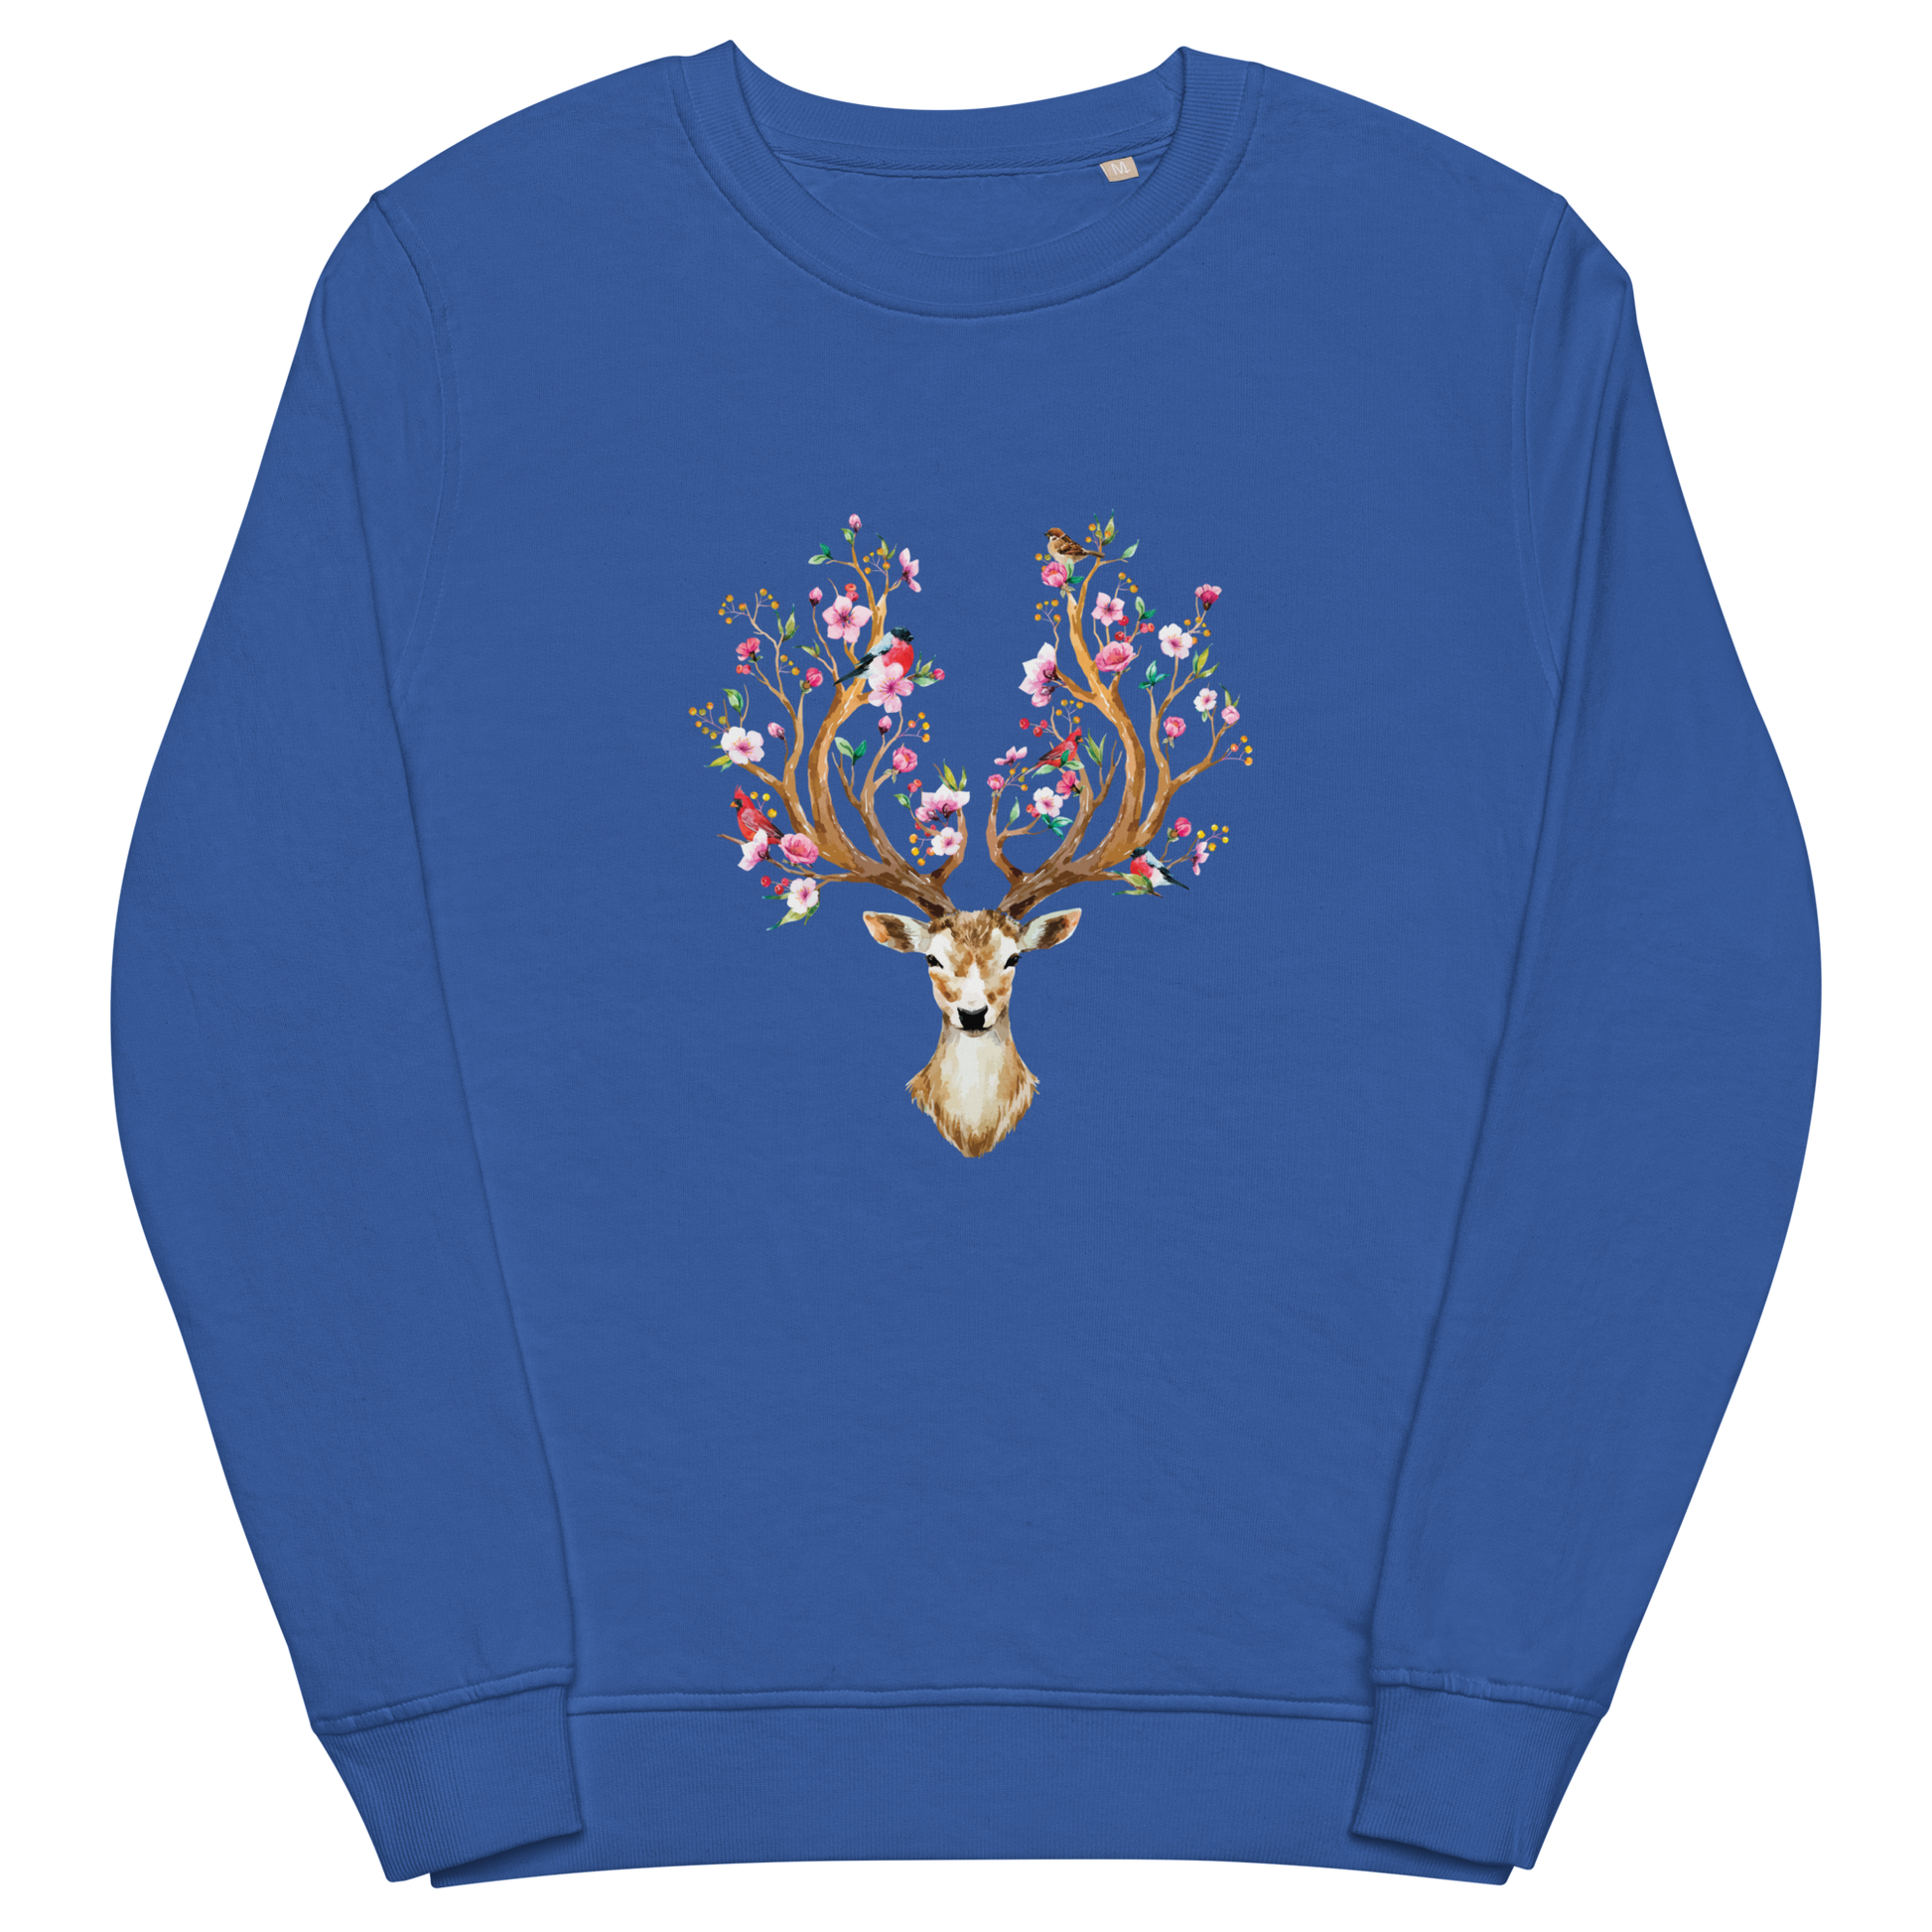 Royal Blue Organic Cotton Red Deer Sweatshirt showcasing a captivating Floral Red Deer graphic on the chest - Cute Red Deer Graphic Sweatshirts - Boozy Fox